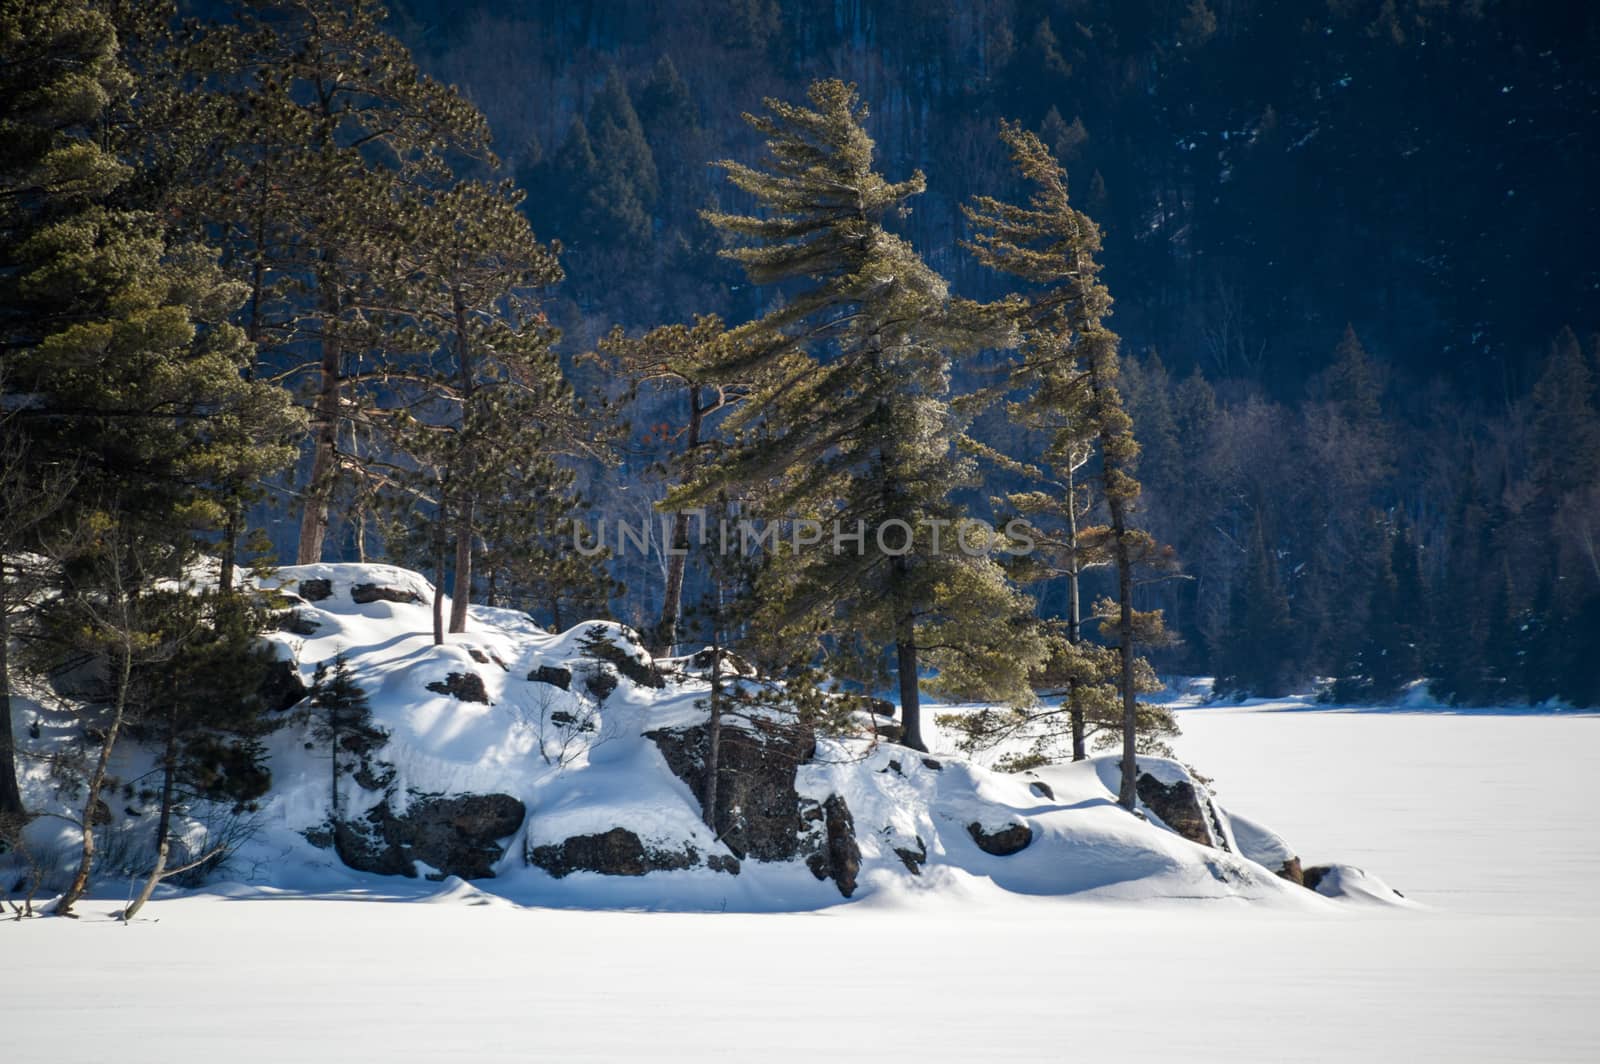 Snowy frozen lake with white pines background in Algonquin park, Ontario.  Snowy mountain behind.